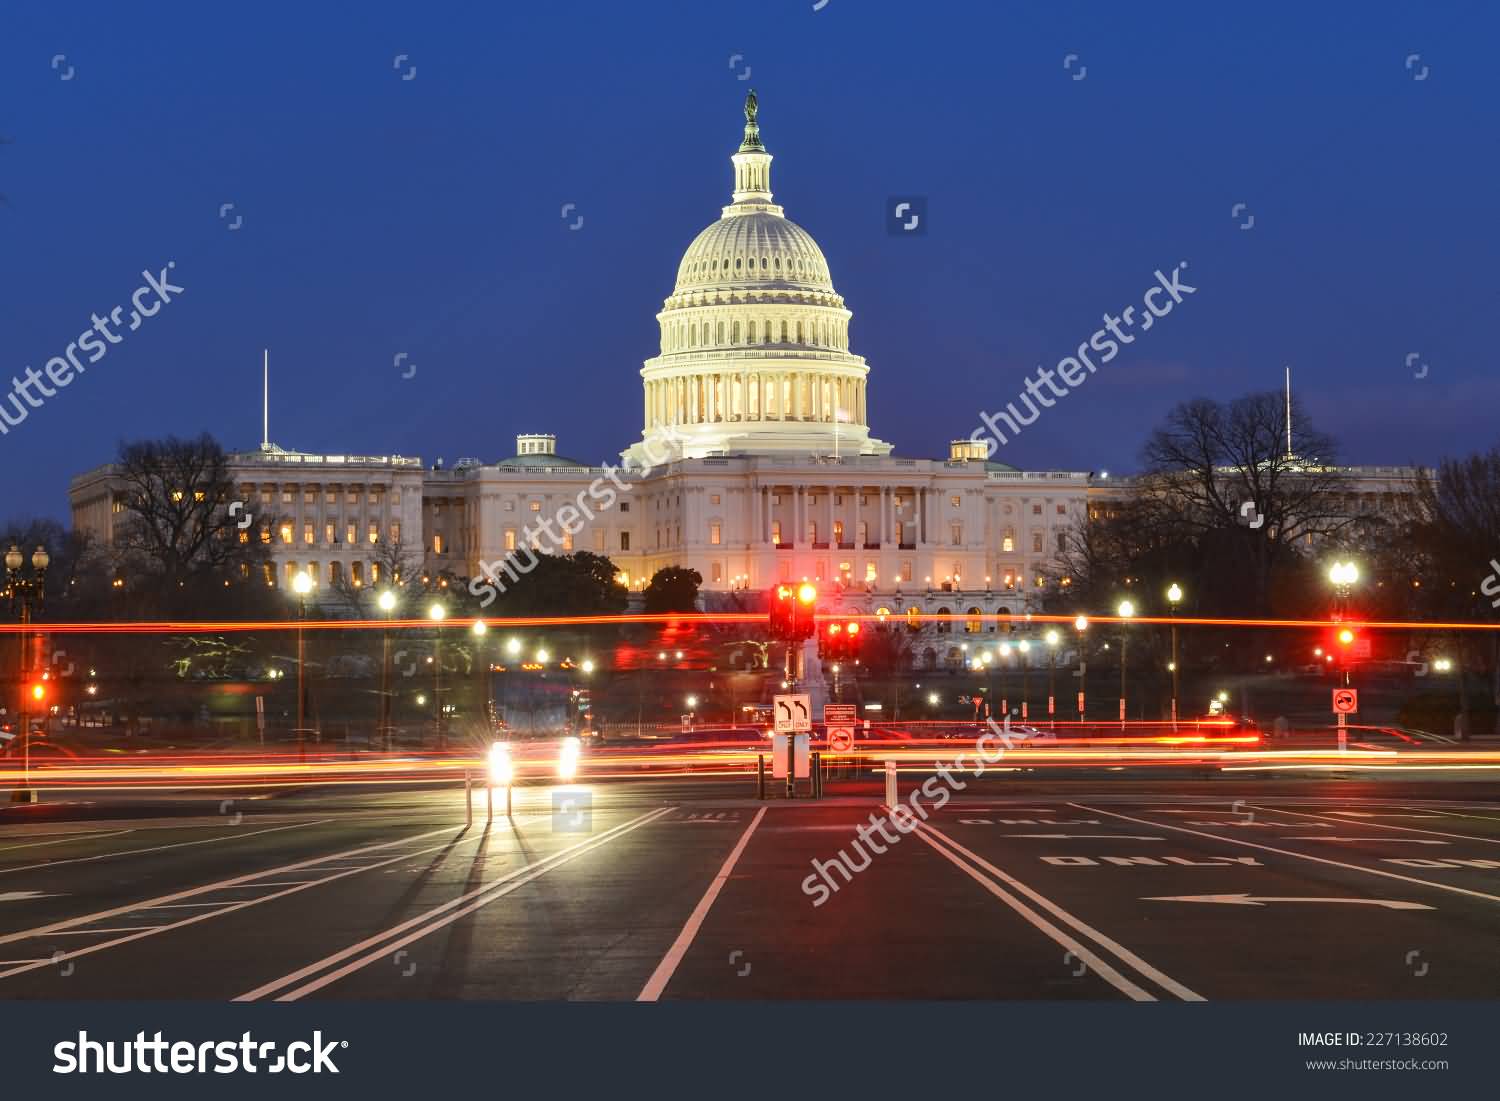 United States Capitol Building View From Pennsylvania Avenue At Night